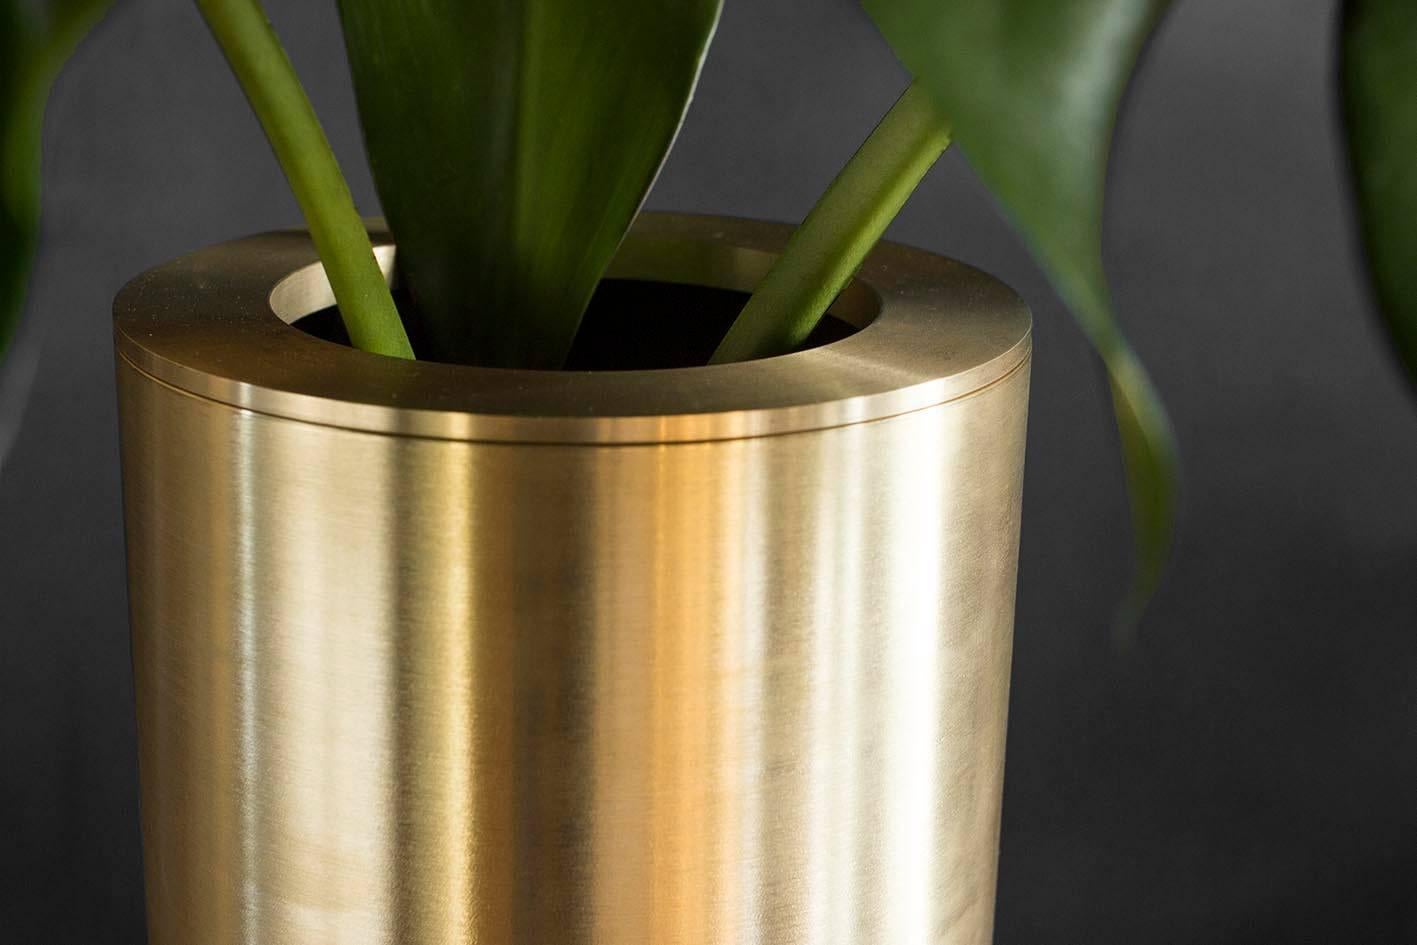 Cofete brass vase by Jan Garncarek
Dimensions: 60 x 18 x 18 cm
Material: Brass
Handcrafted by Jan Garncarek.
Signed 

This unique vase was designed during the designer's travels around the Canary Islands. Its mystical and minimalist form was